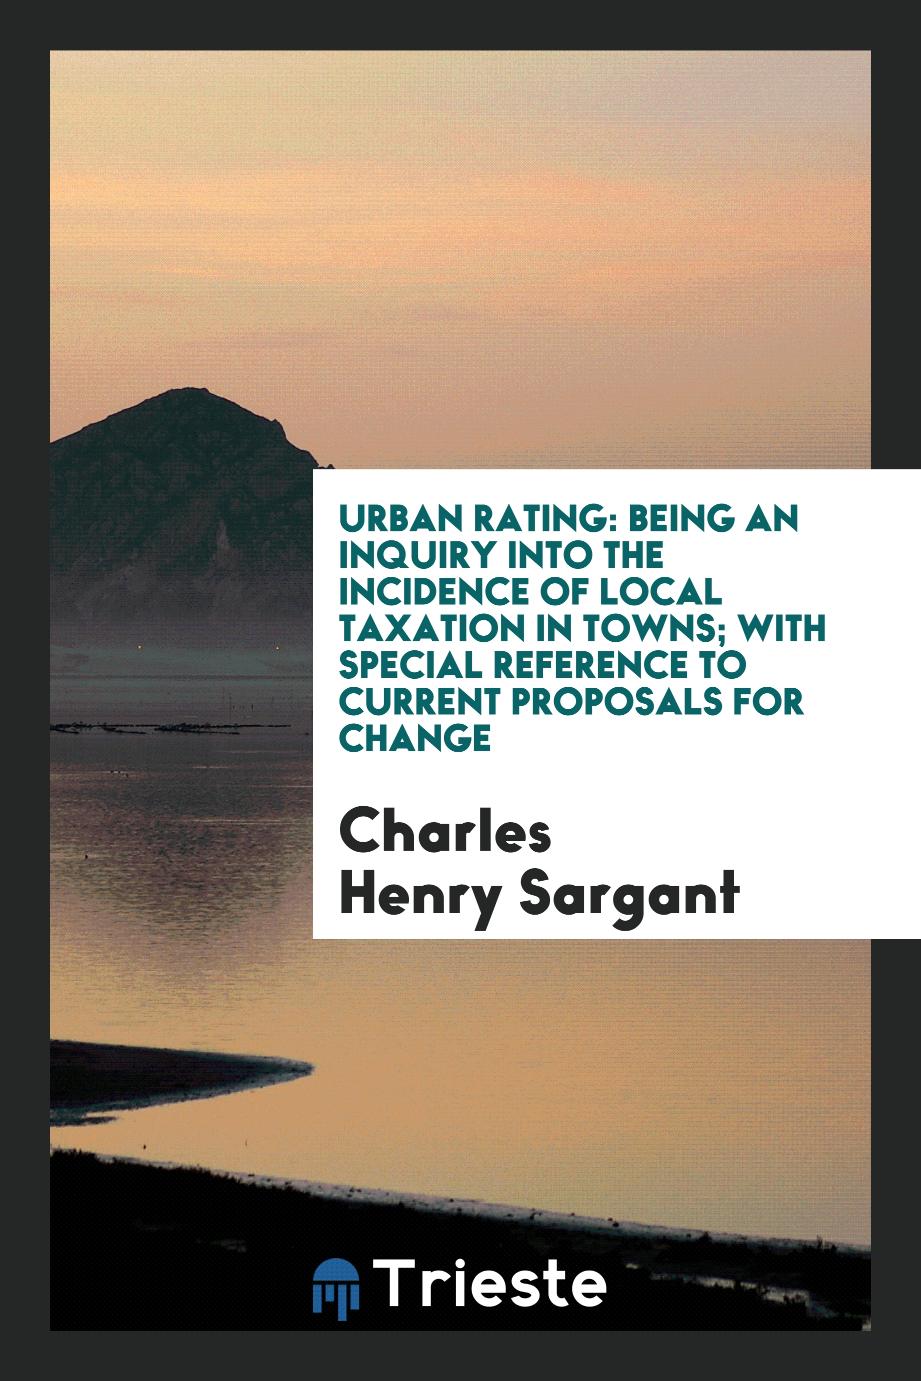 Urban Rating: Being an Inquiry into the Incidence of Local Taxation in Towns; With Special Reference to Current Proposals for Change